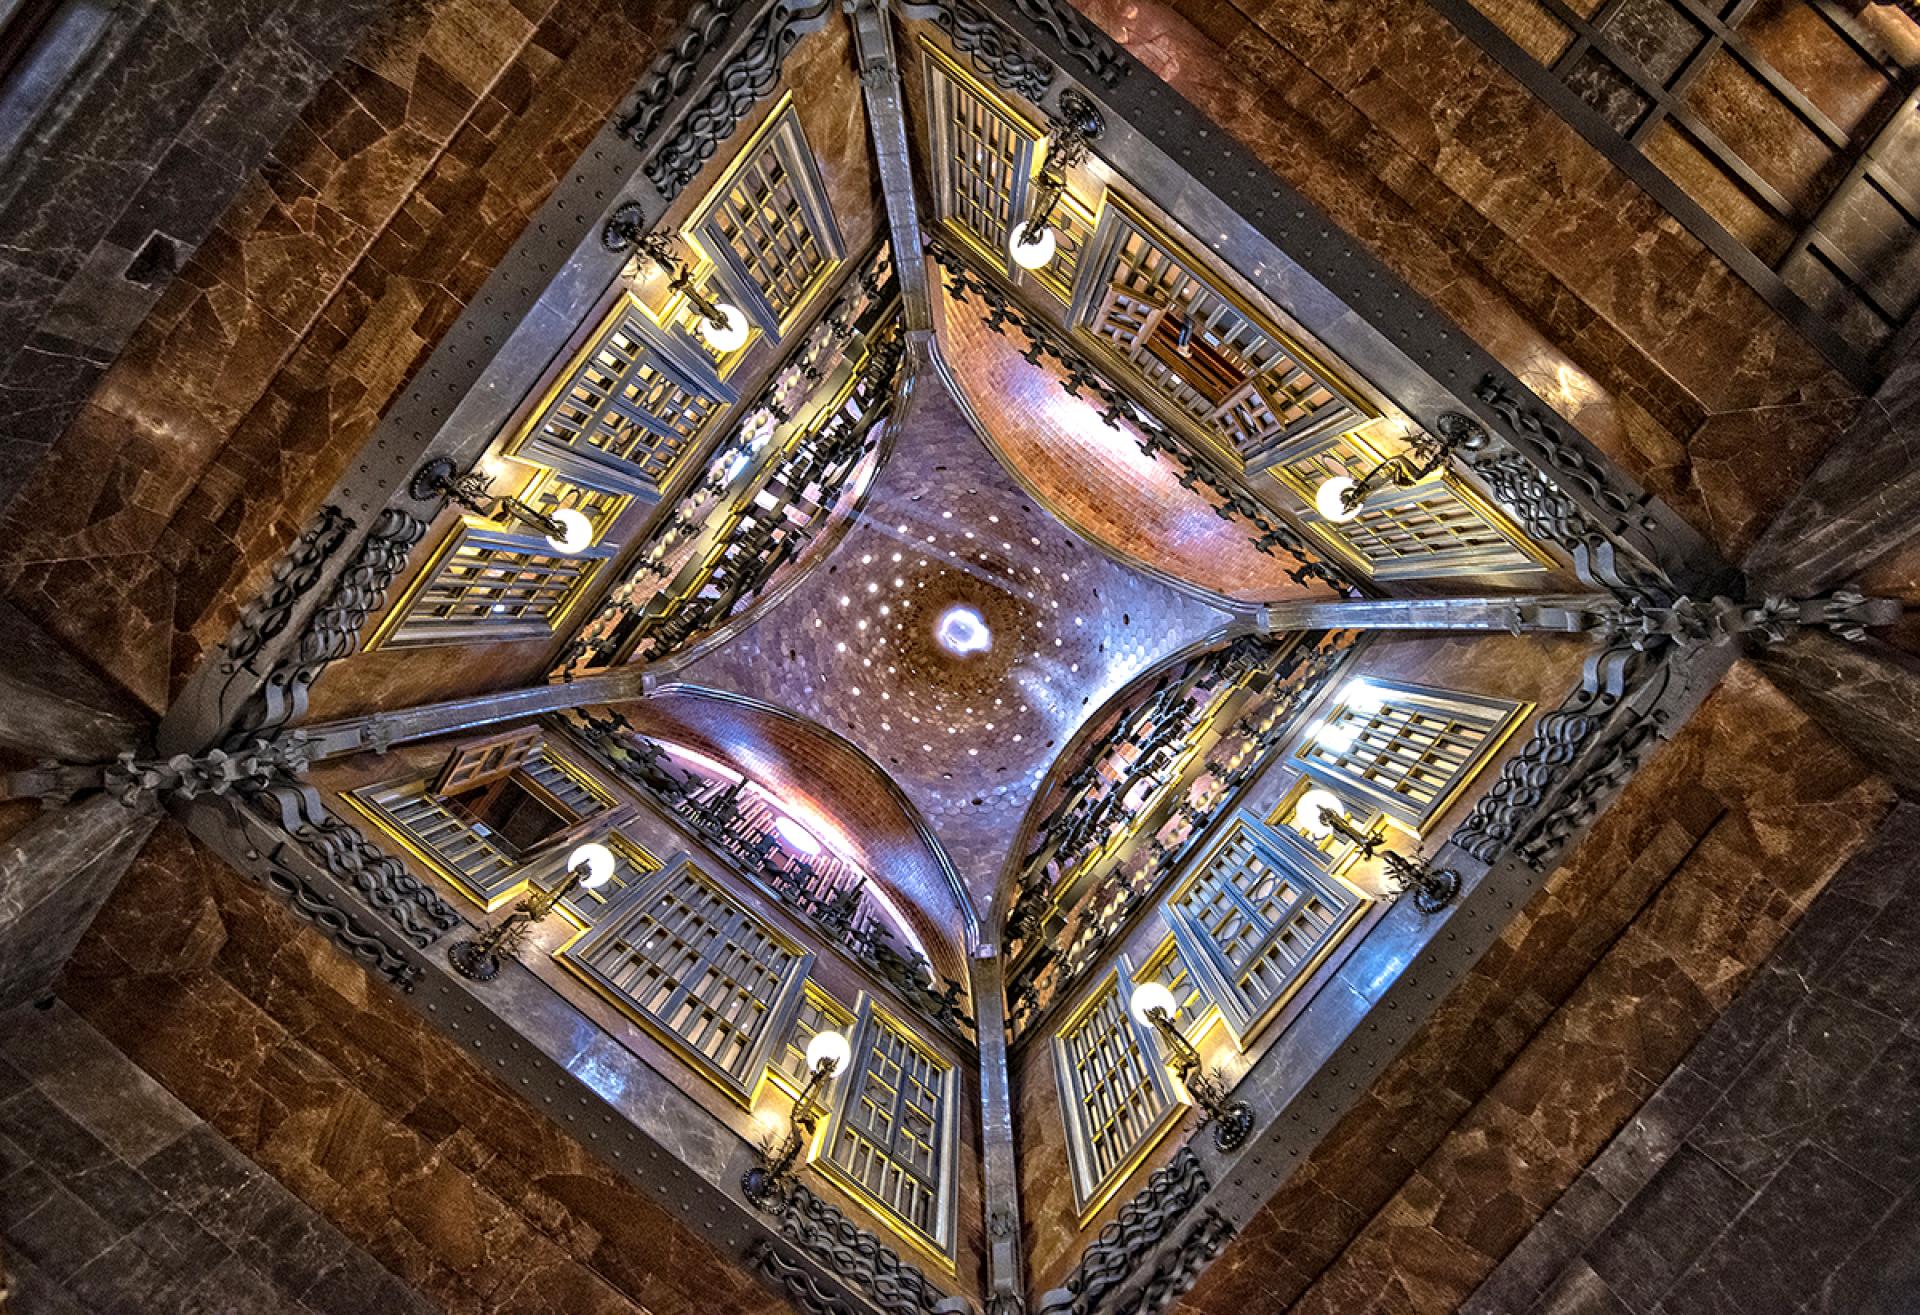 London Photography Awards Winner - Ceiling, Palao Guell